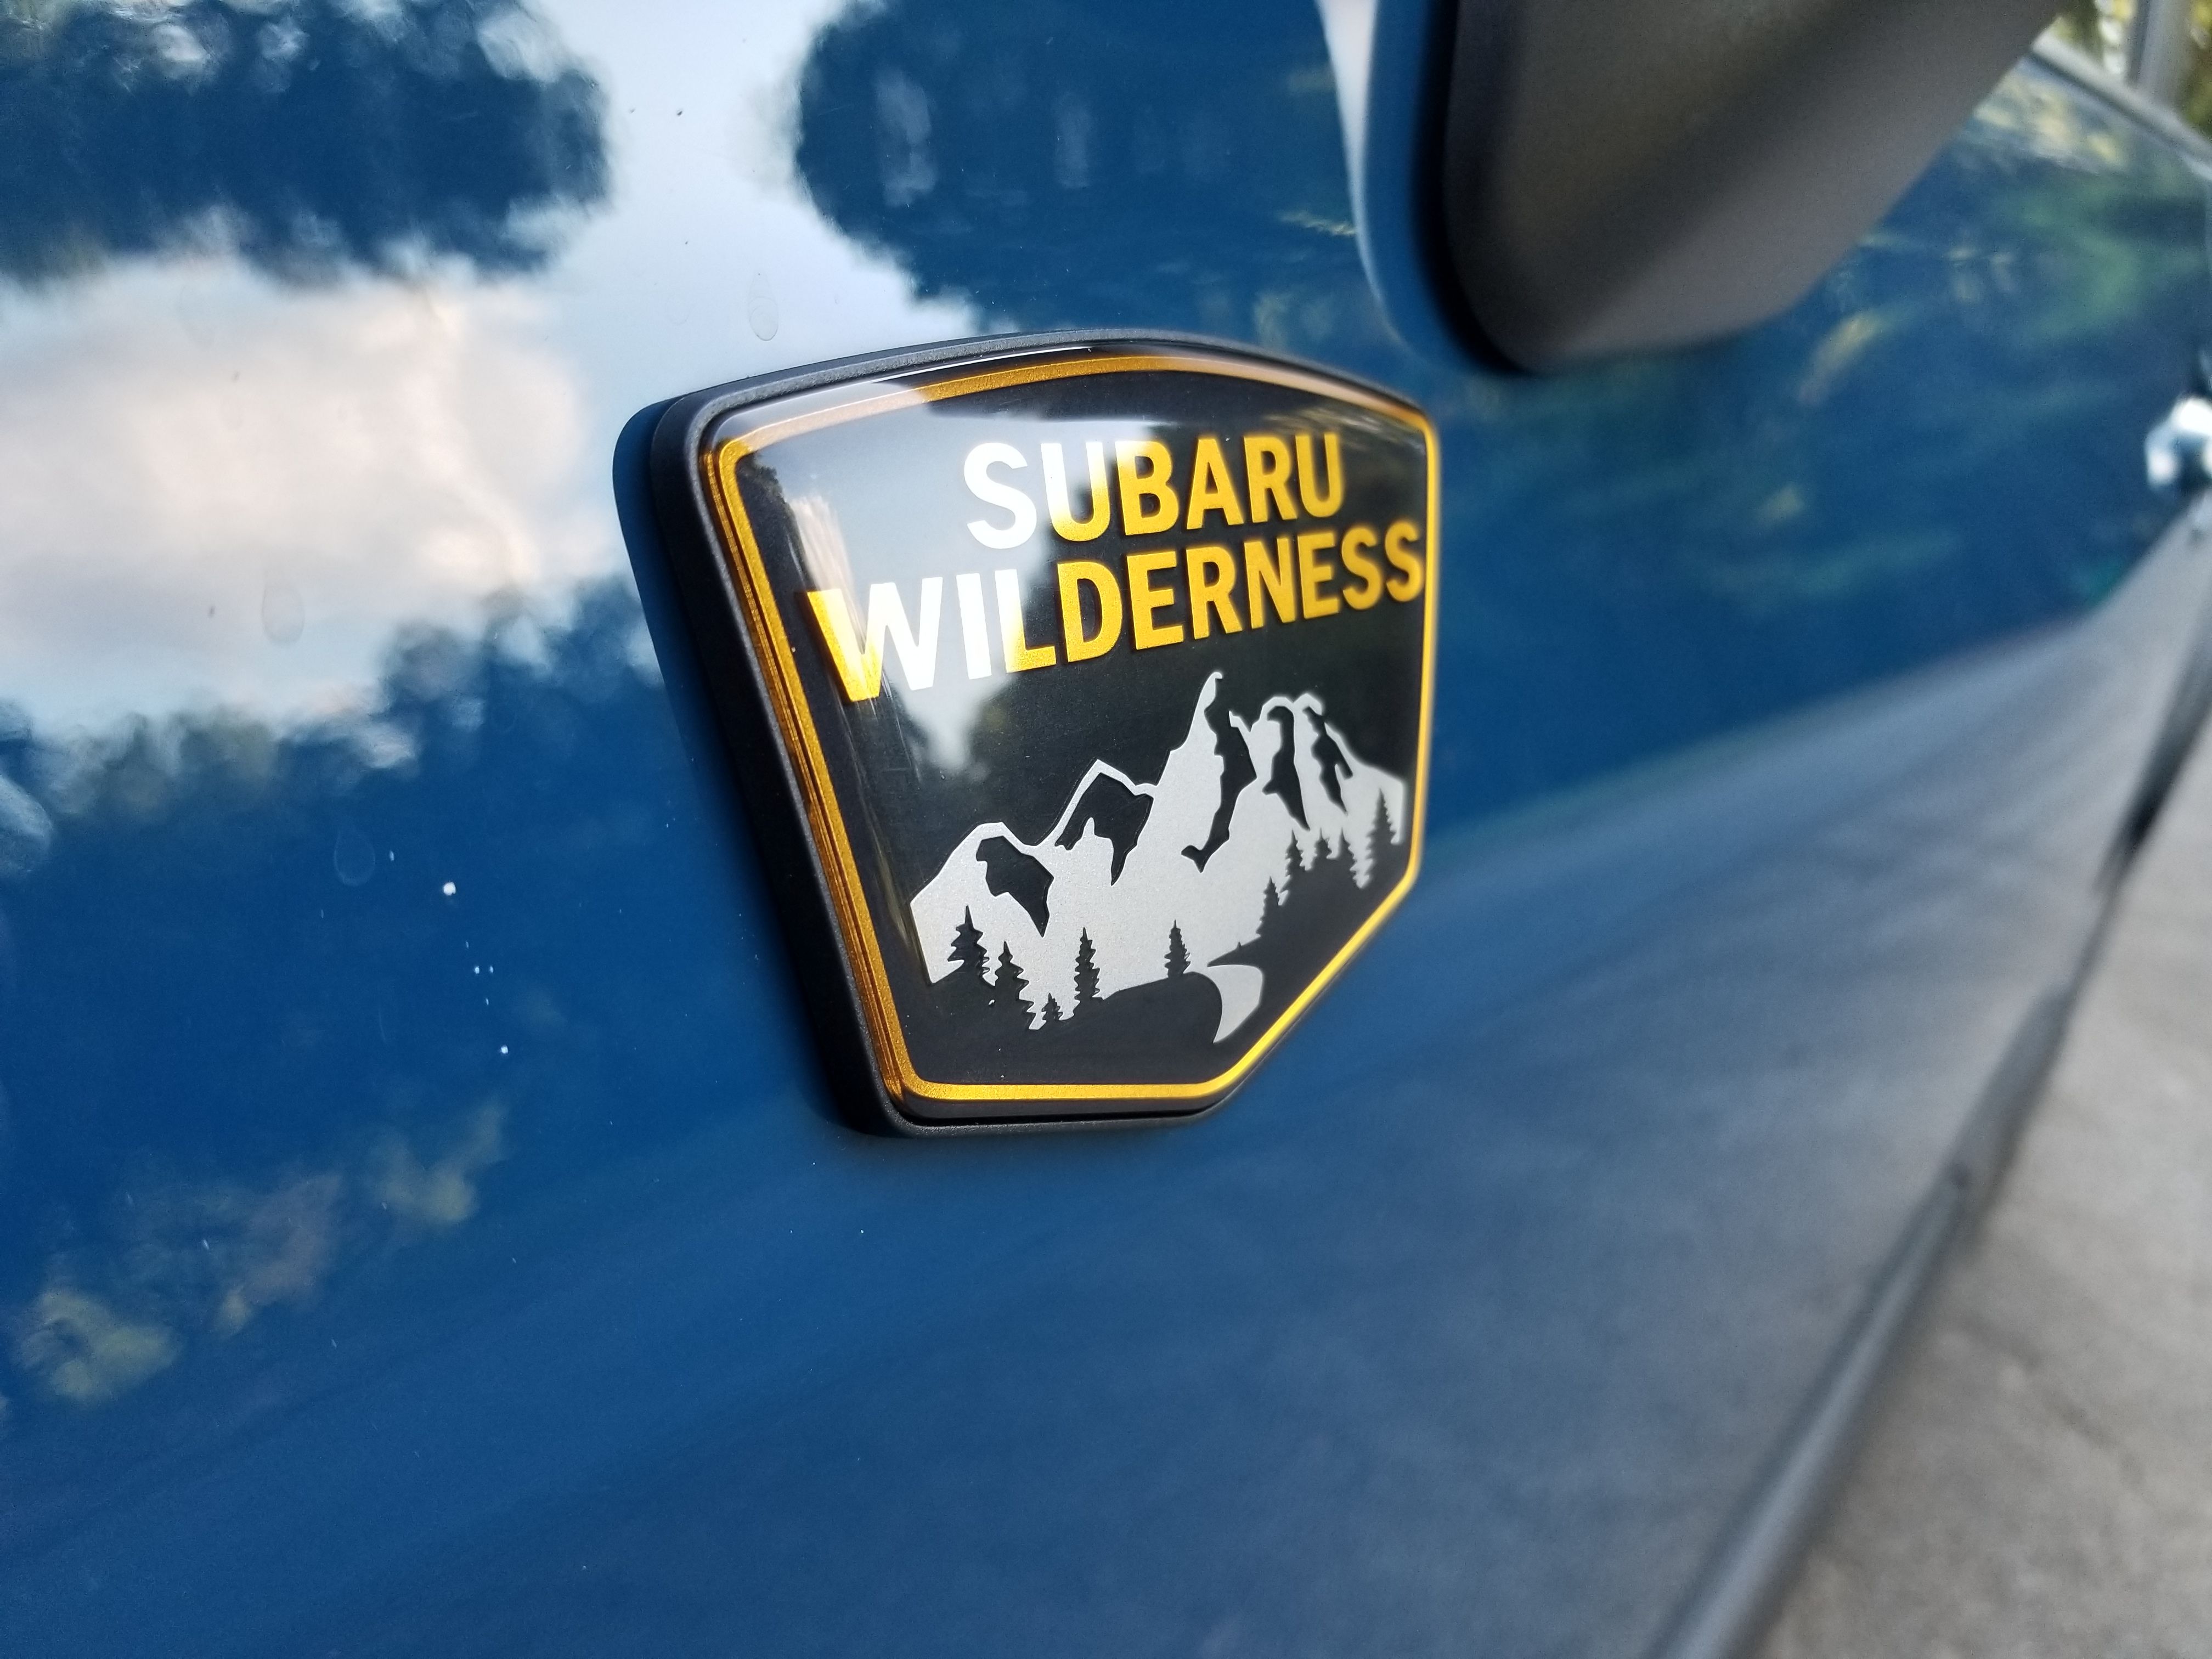 2022 Subaru Forester Wilderness - So Much More Than A Grocery Getter